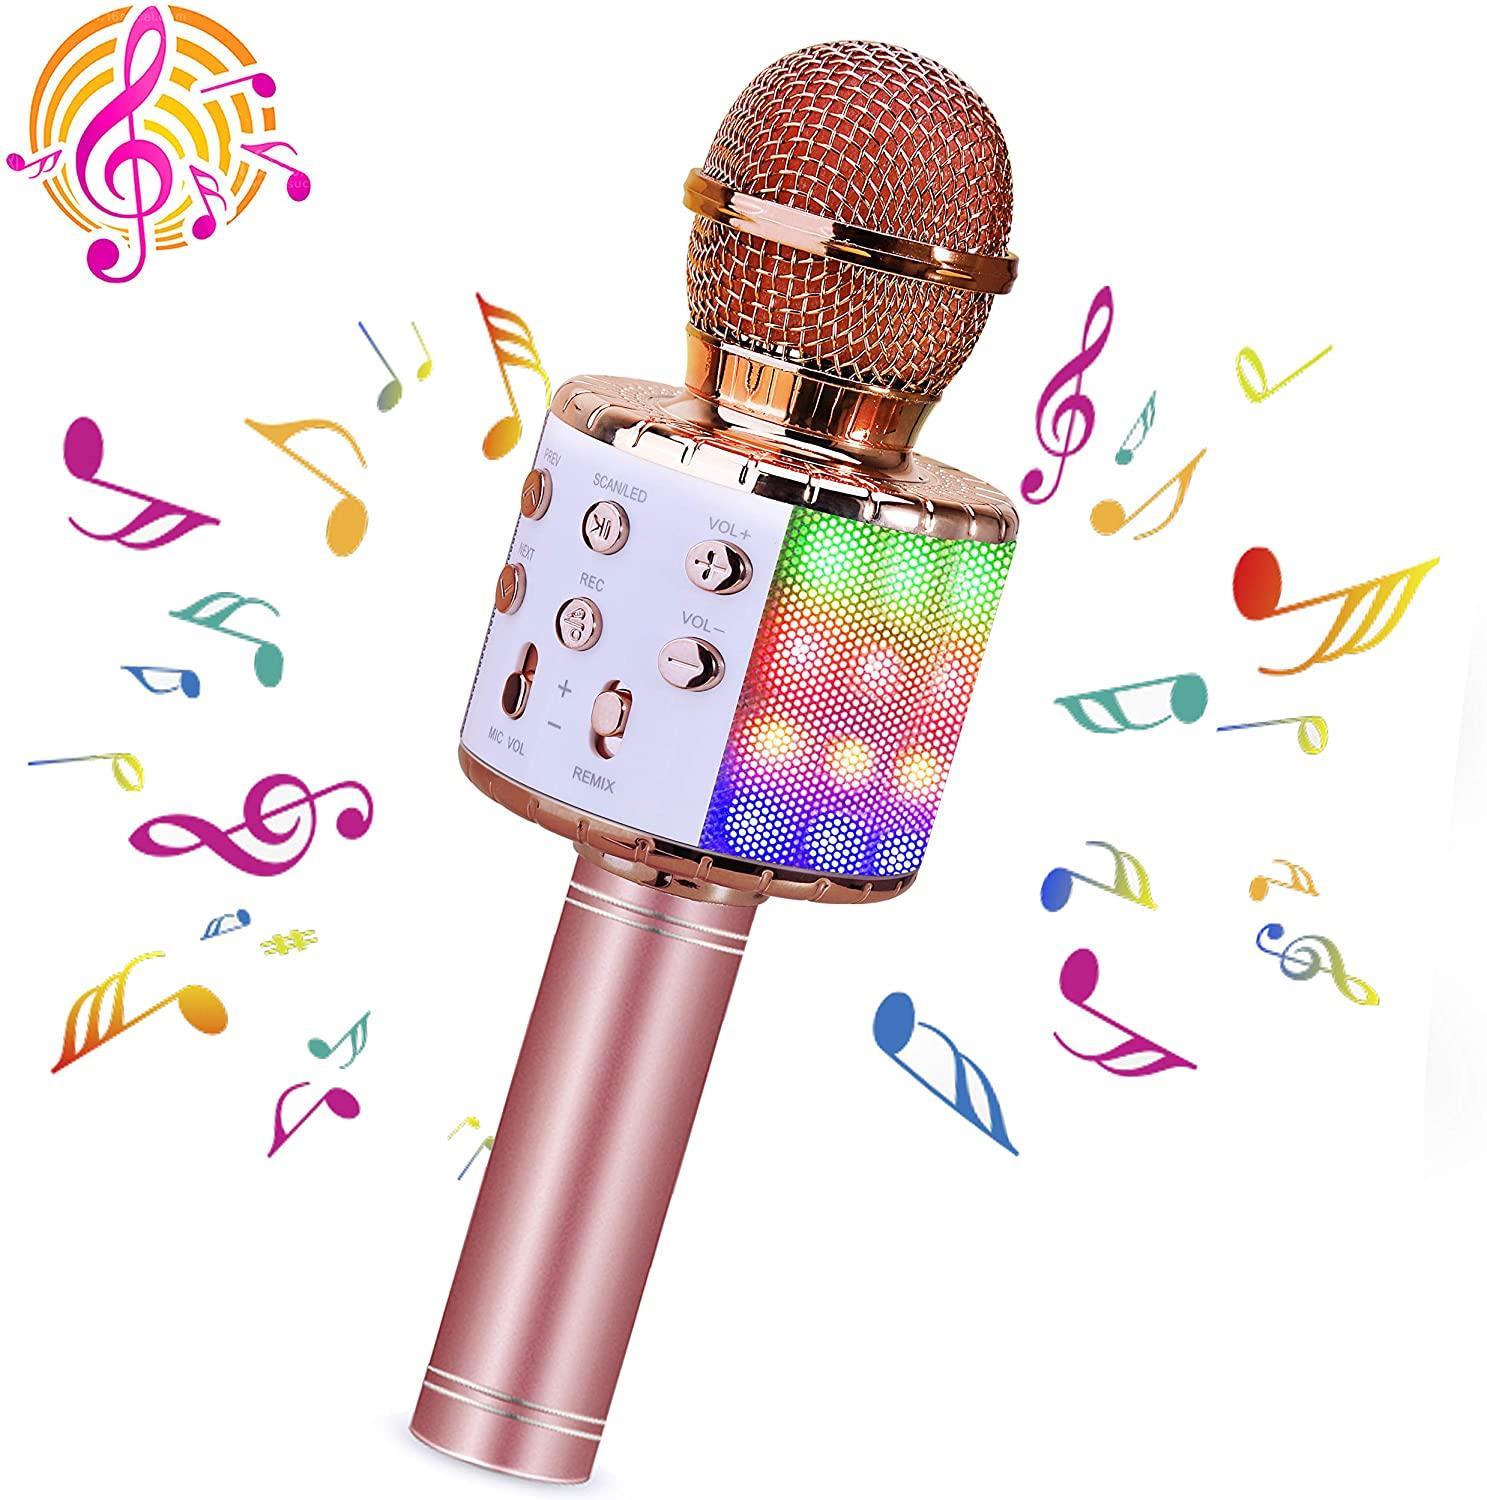 4 in 1 Bluetooth Handheld Wireless Karaoke Microphone Portable Speaker Machine Home KTV Player with Record Function for Android & iOS Devices(Pink)